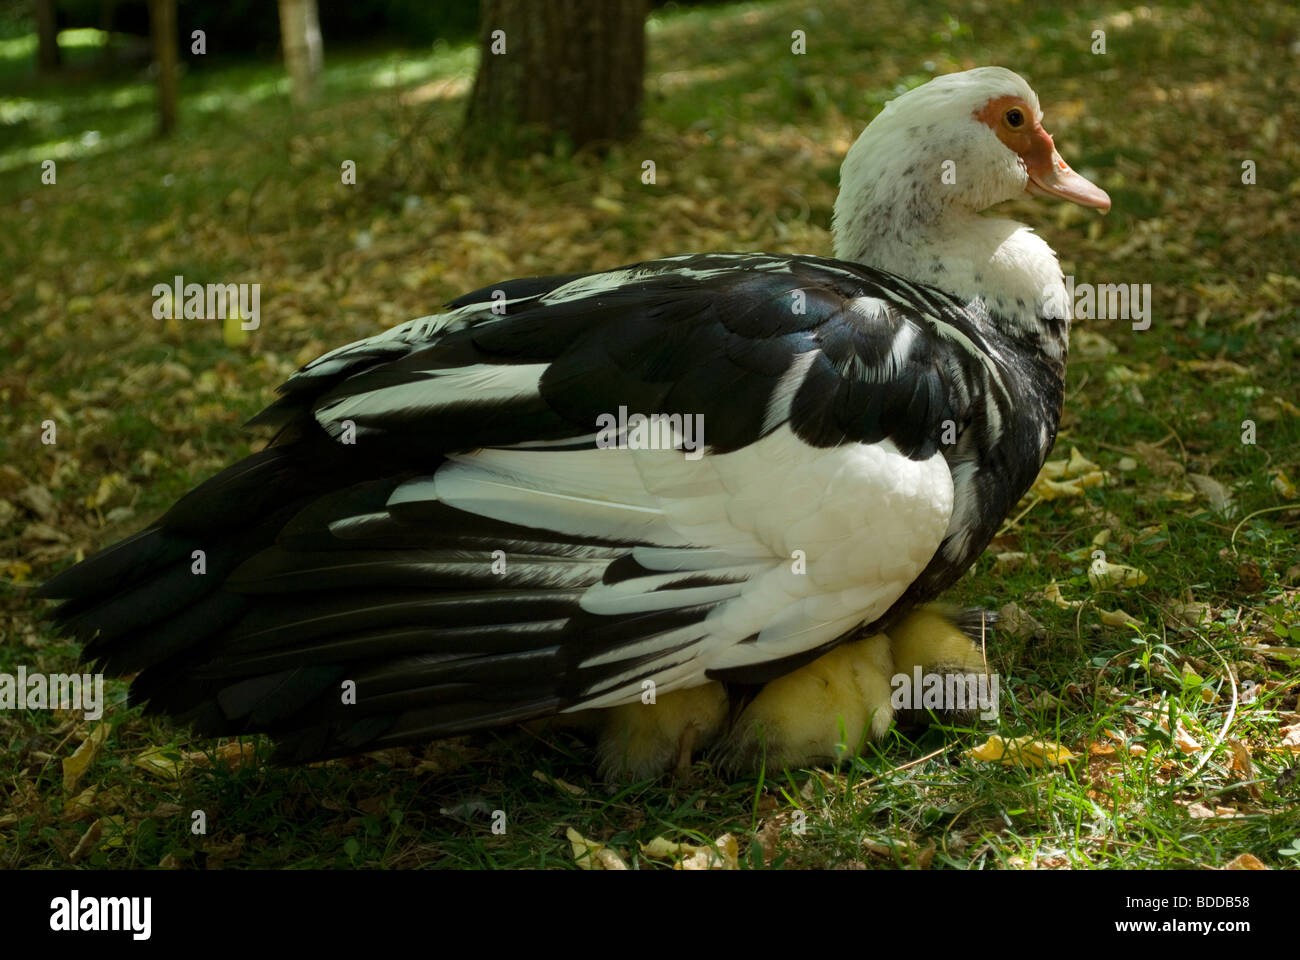 Muscovy ducklings keeping warm under mum, Arcanhac, France. Stock Photo